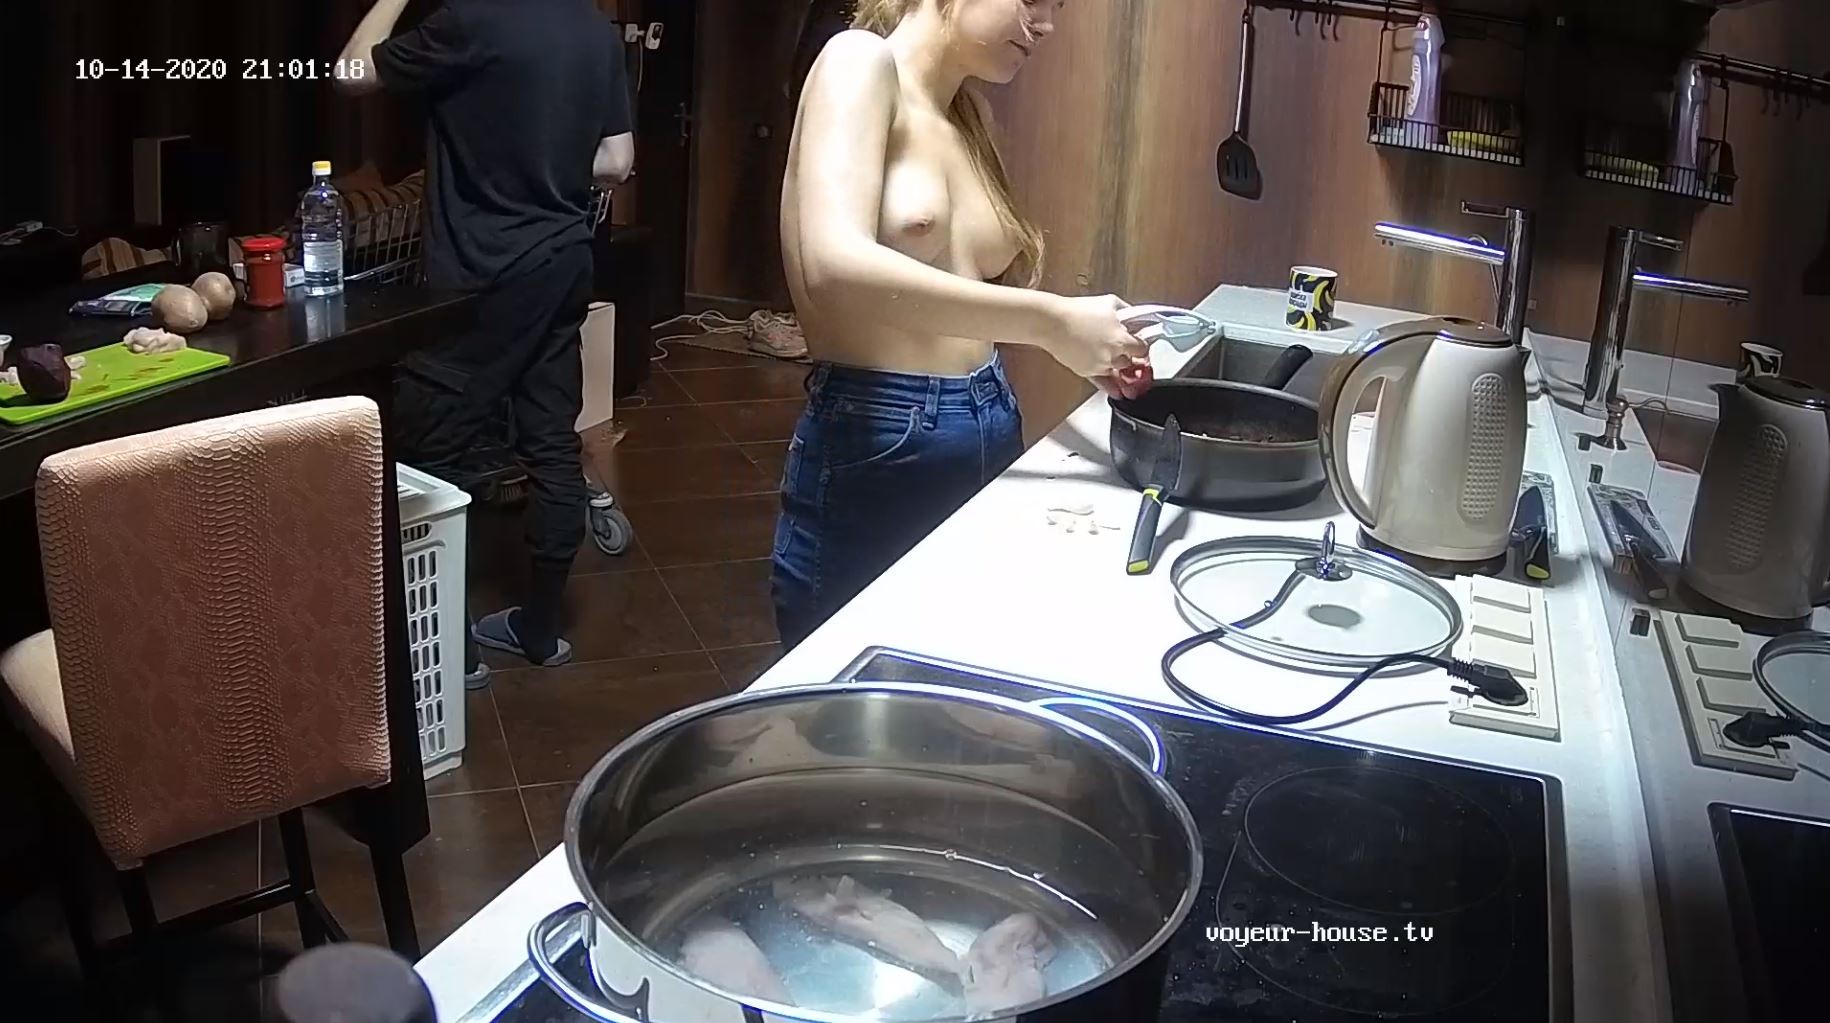 Val topless cooking, Oct14/20